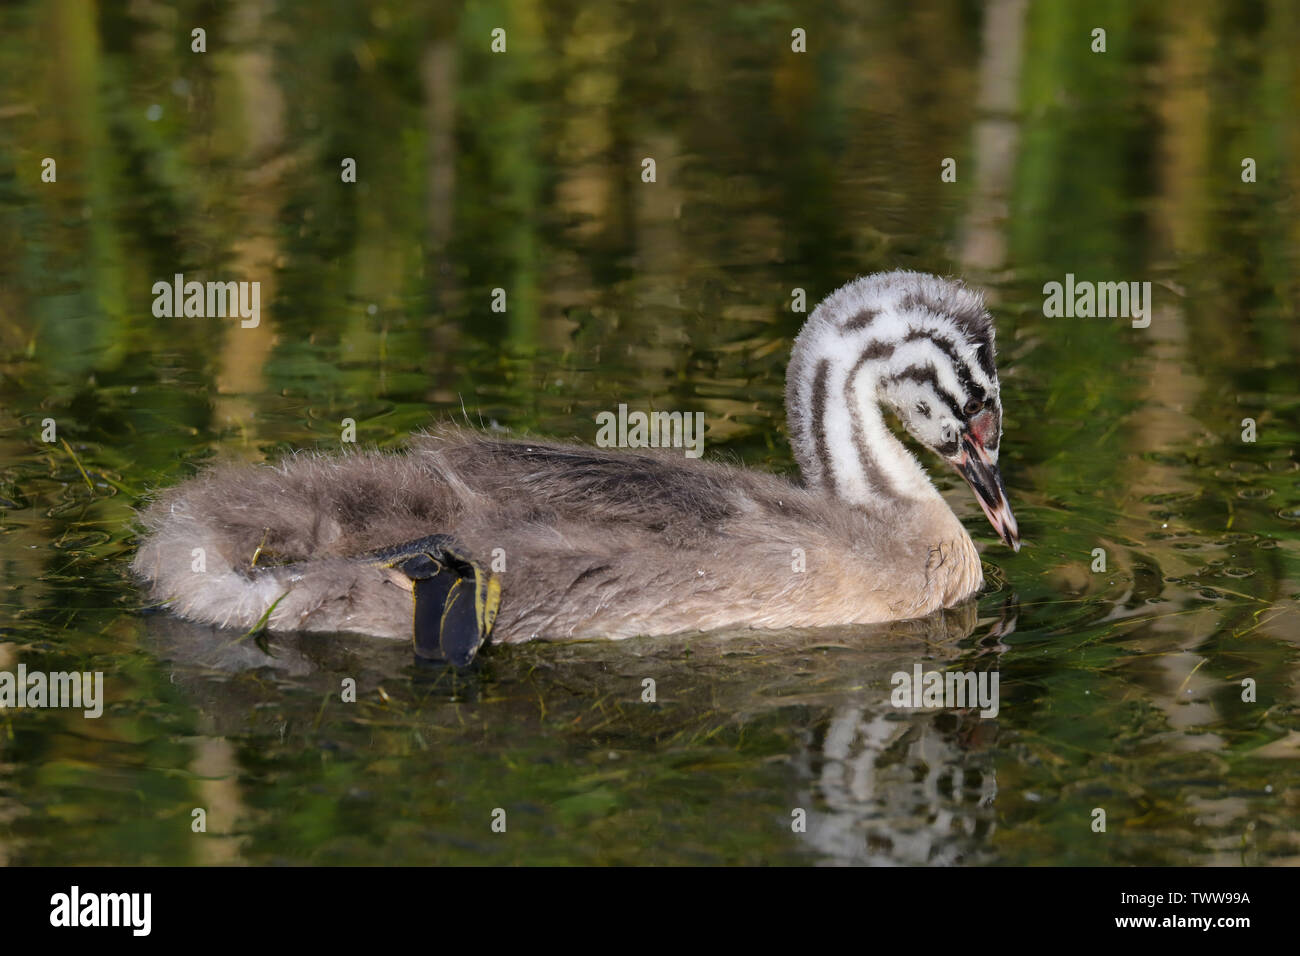 A Great Crested Grebe (Podiceps cristatus) chick swimming on a lake.  Taken at Cardiff Bay Nature Reserve, Cardiff, Wales, UK Stock Photo